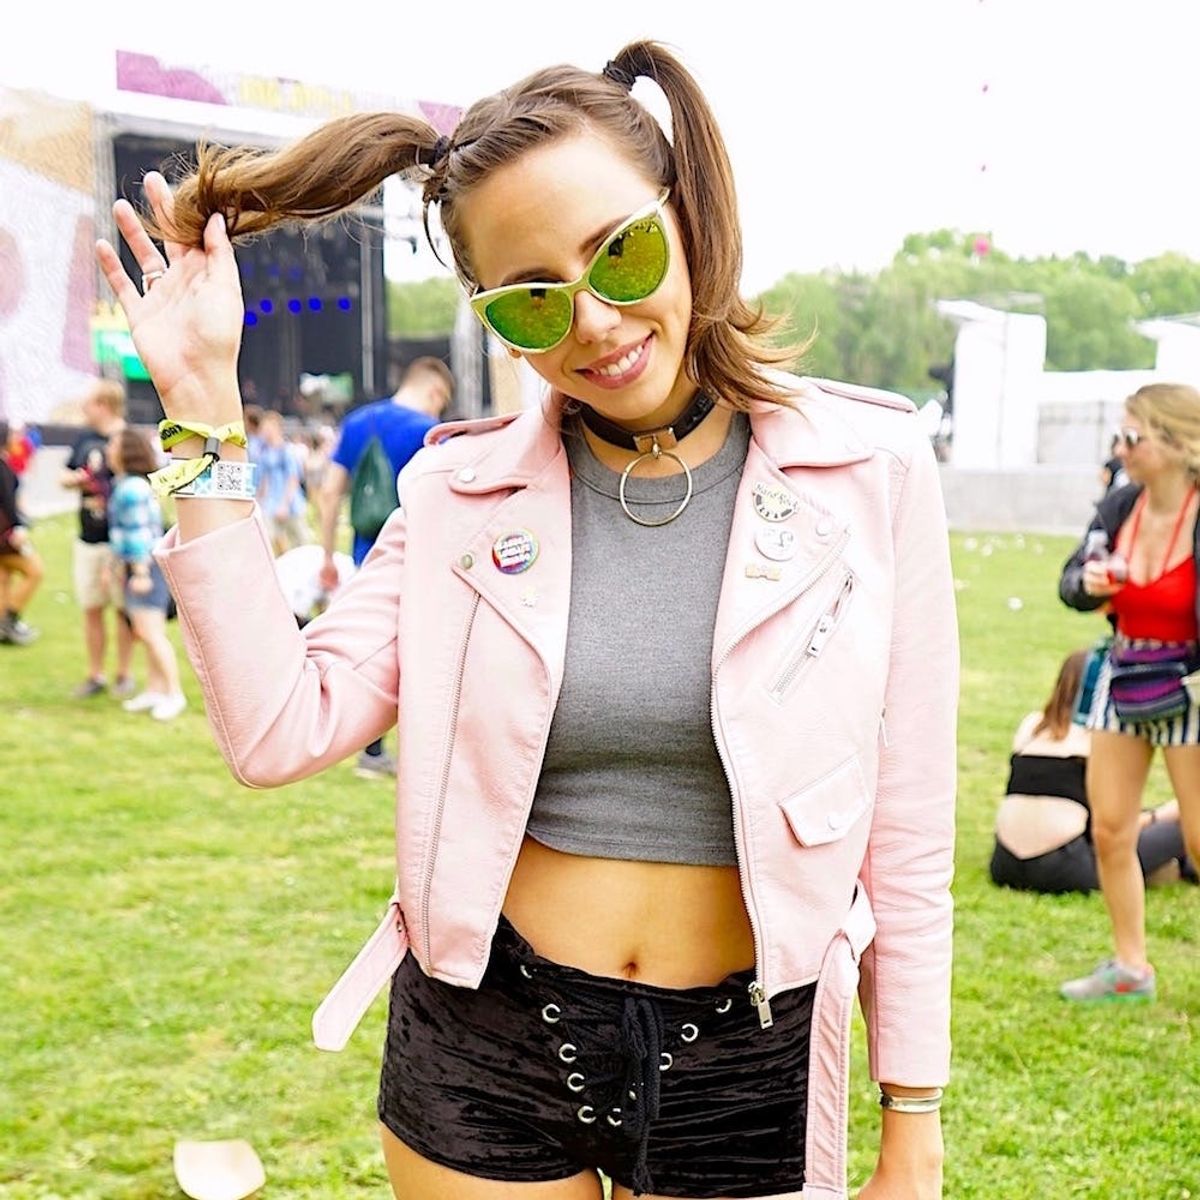 26 of the Best Street Style Snaps from NYC’s Biggest Musical Festival Governors Ball